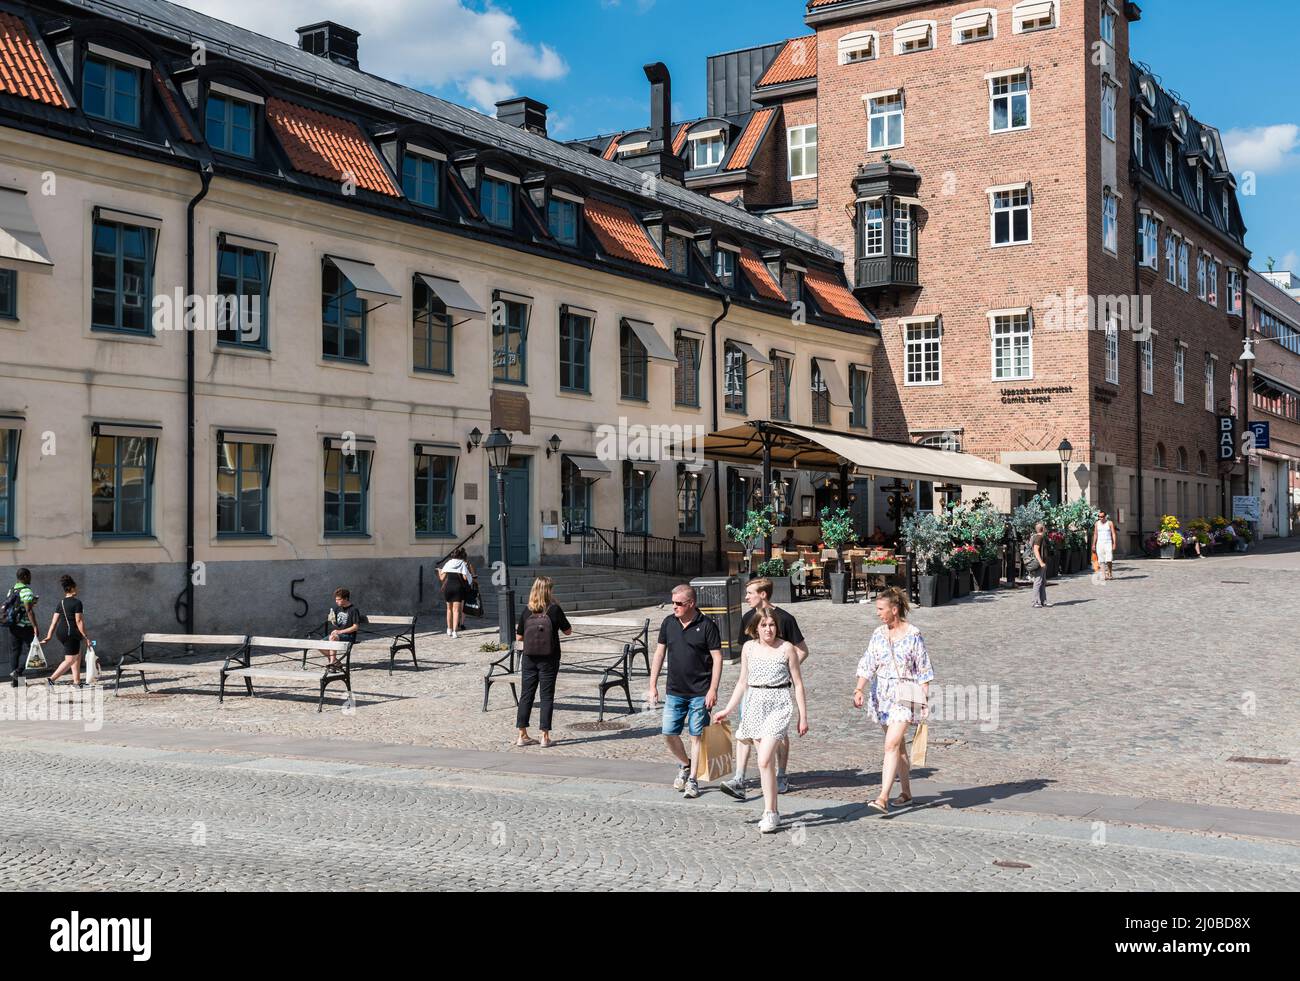 Uppsala, Uppland, Sweden - 07 27 2019- People walking over old town square Stock Photo